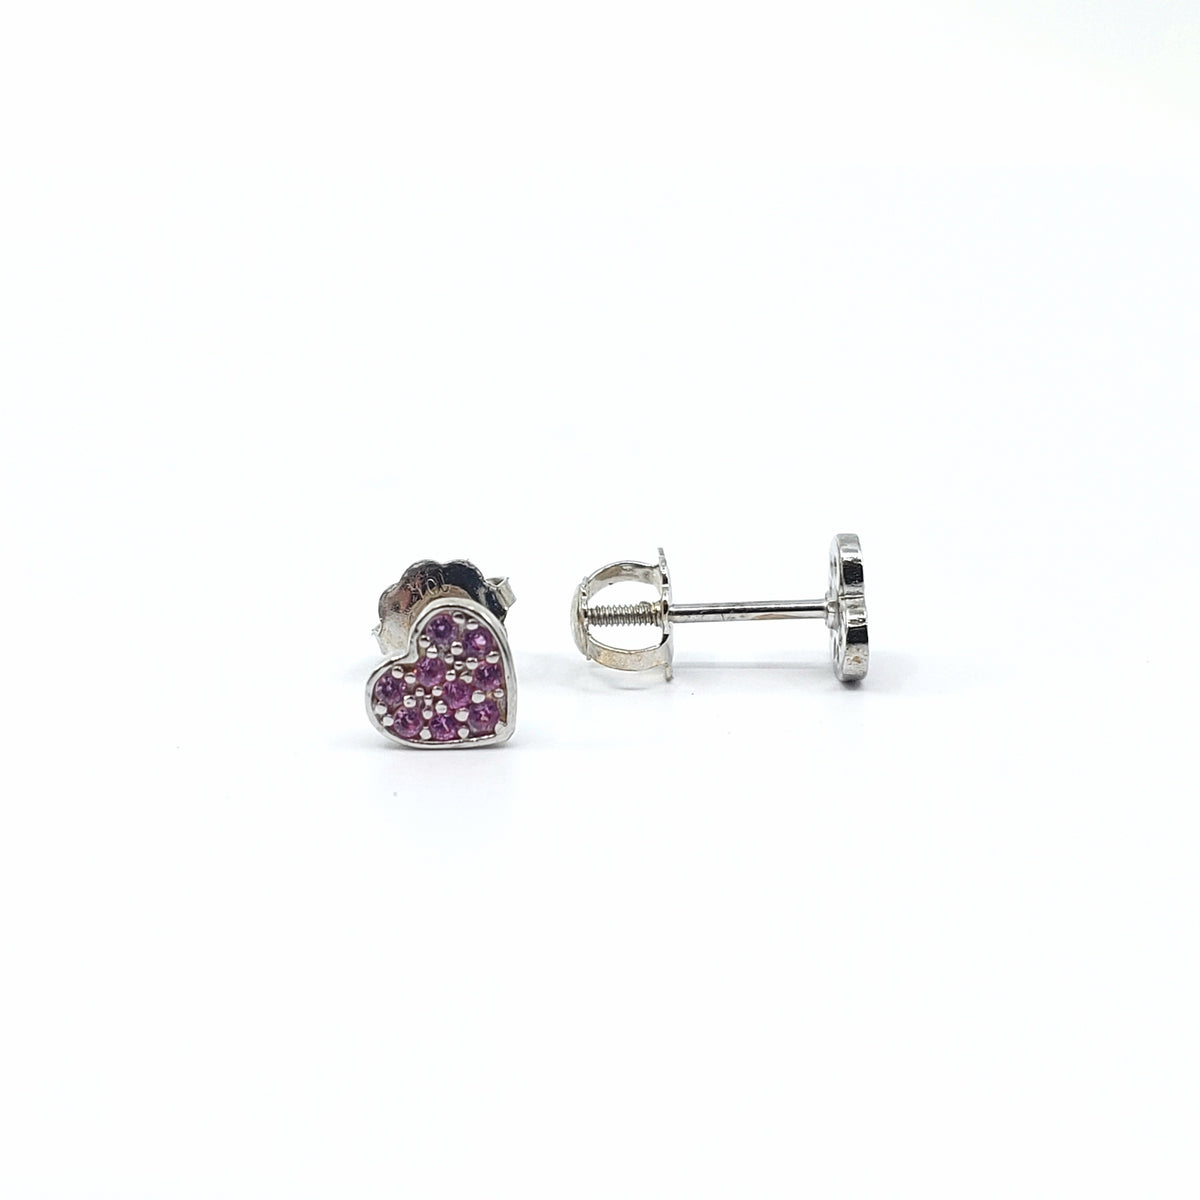 10K White Gold Heart Shaped with Pink Cubic Zirconia Studs with Screw Backs- 5mm